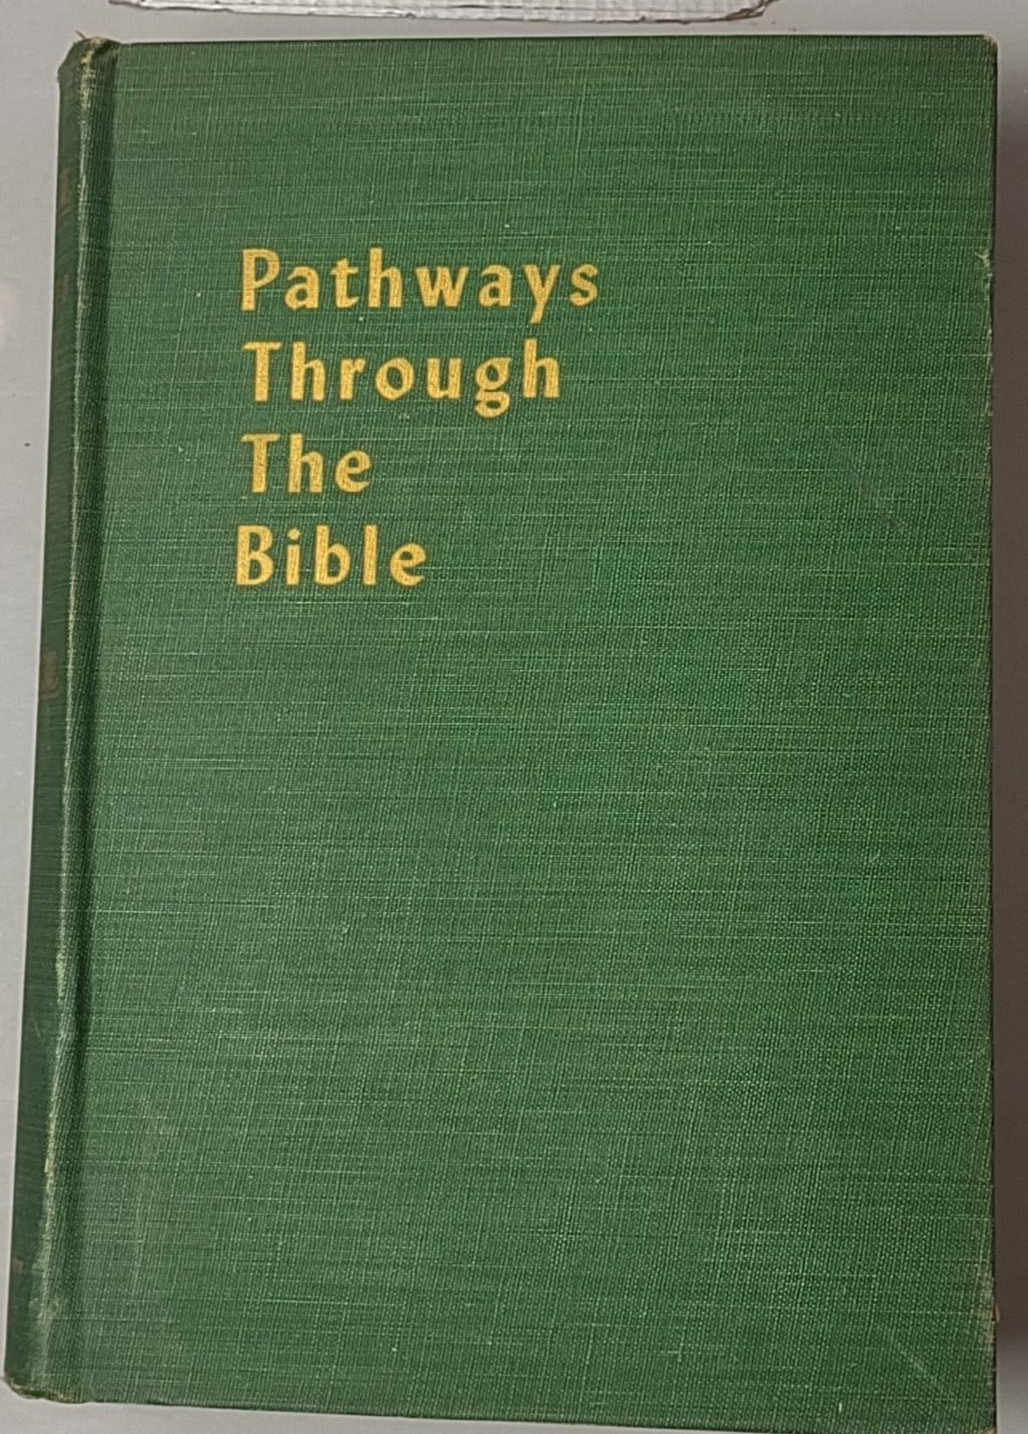 Pathways Through The Bible  M.J. Cohen The Jewish Publ. Society 1953 11123